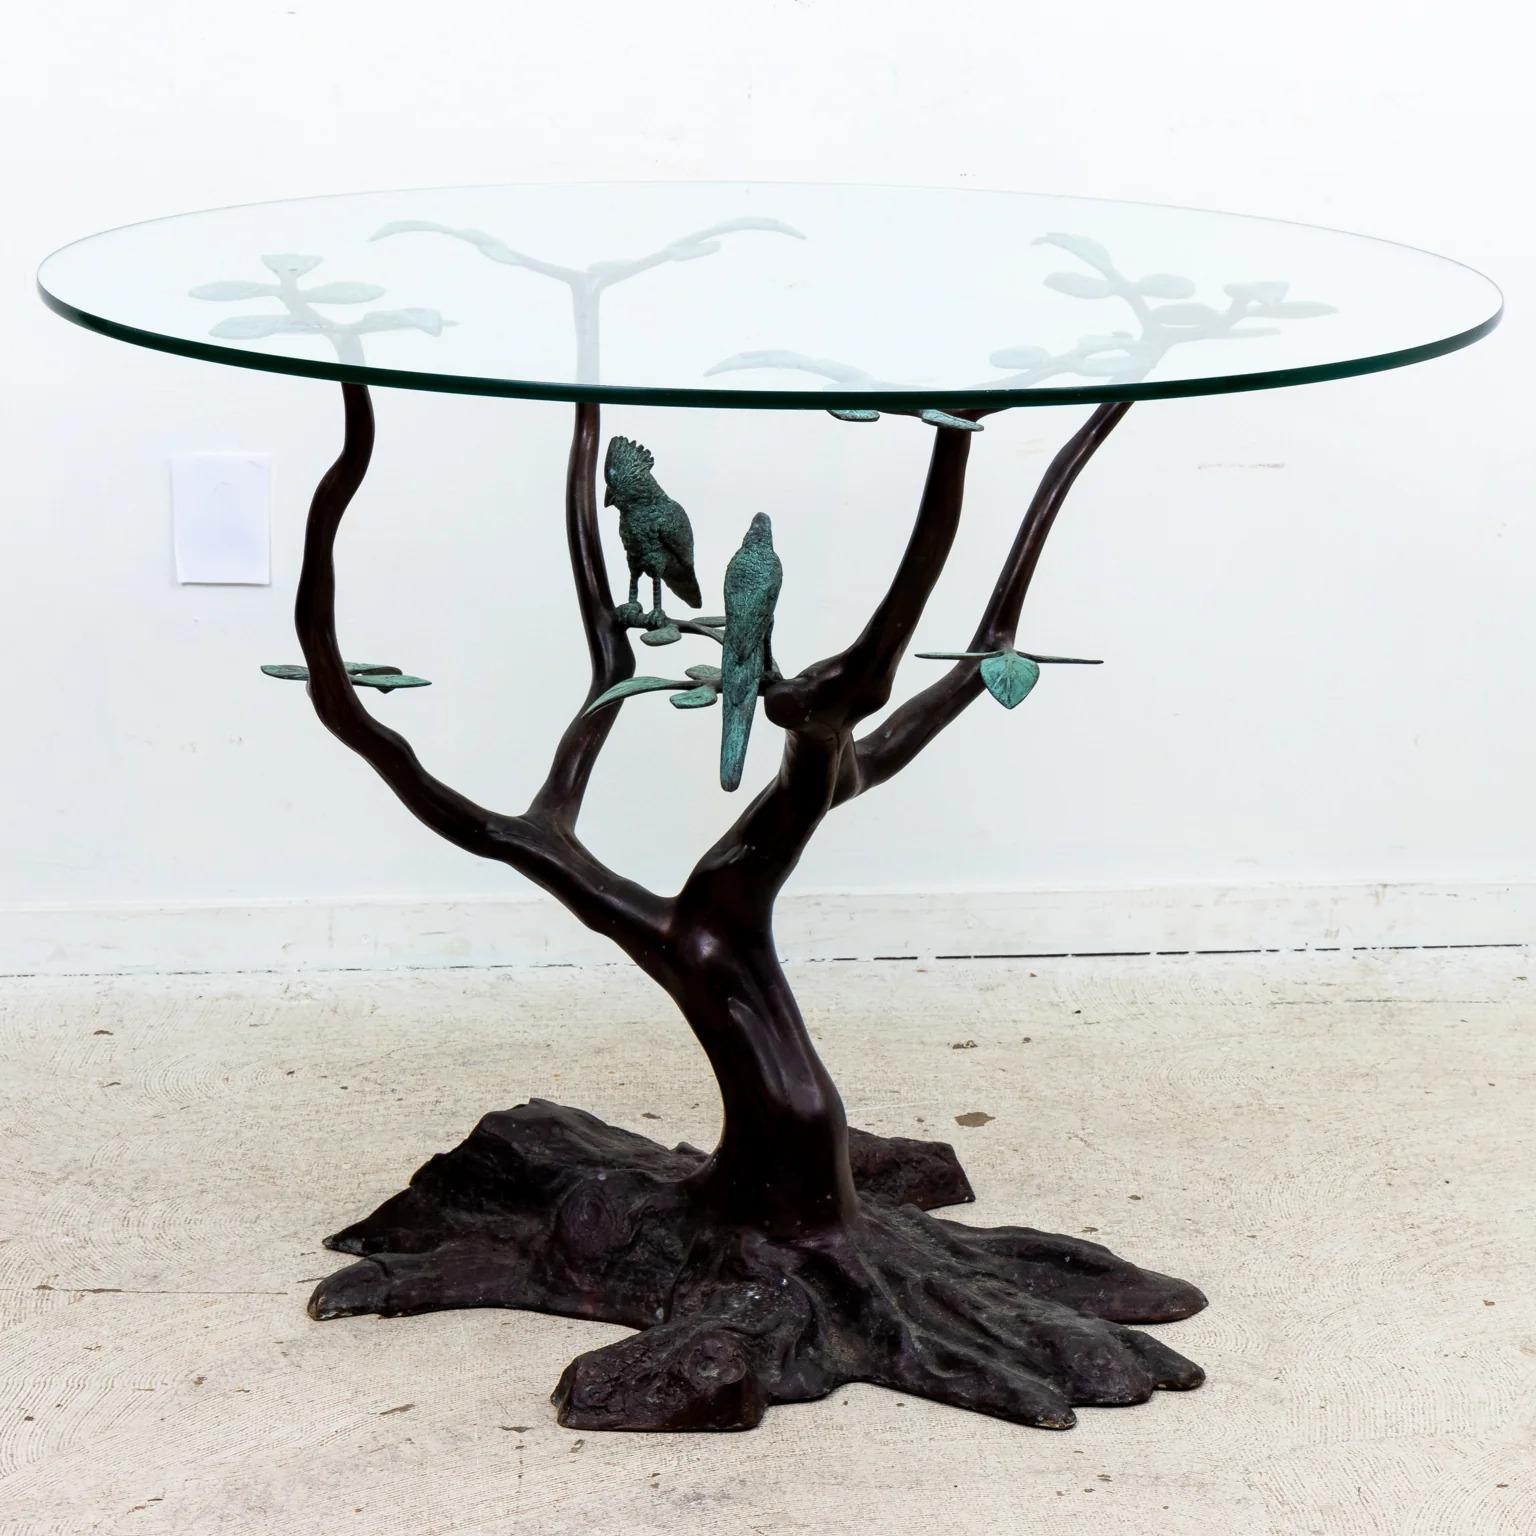 A patinated brass tree form table with two molded tropical birds resting on its branches. The round glass top supported a by sparse series of leaves. Made by hand with La Barge paper label on the underside of the base. The overall design reminiscent